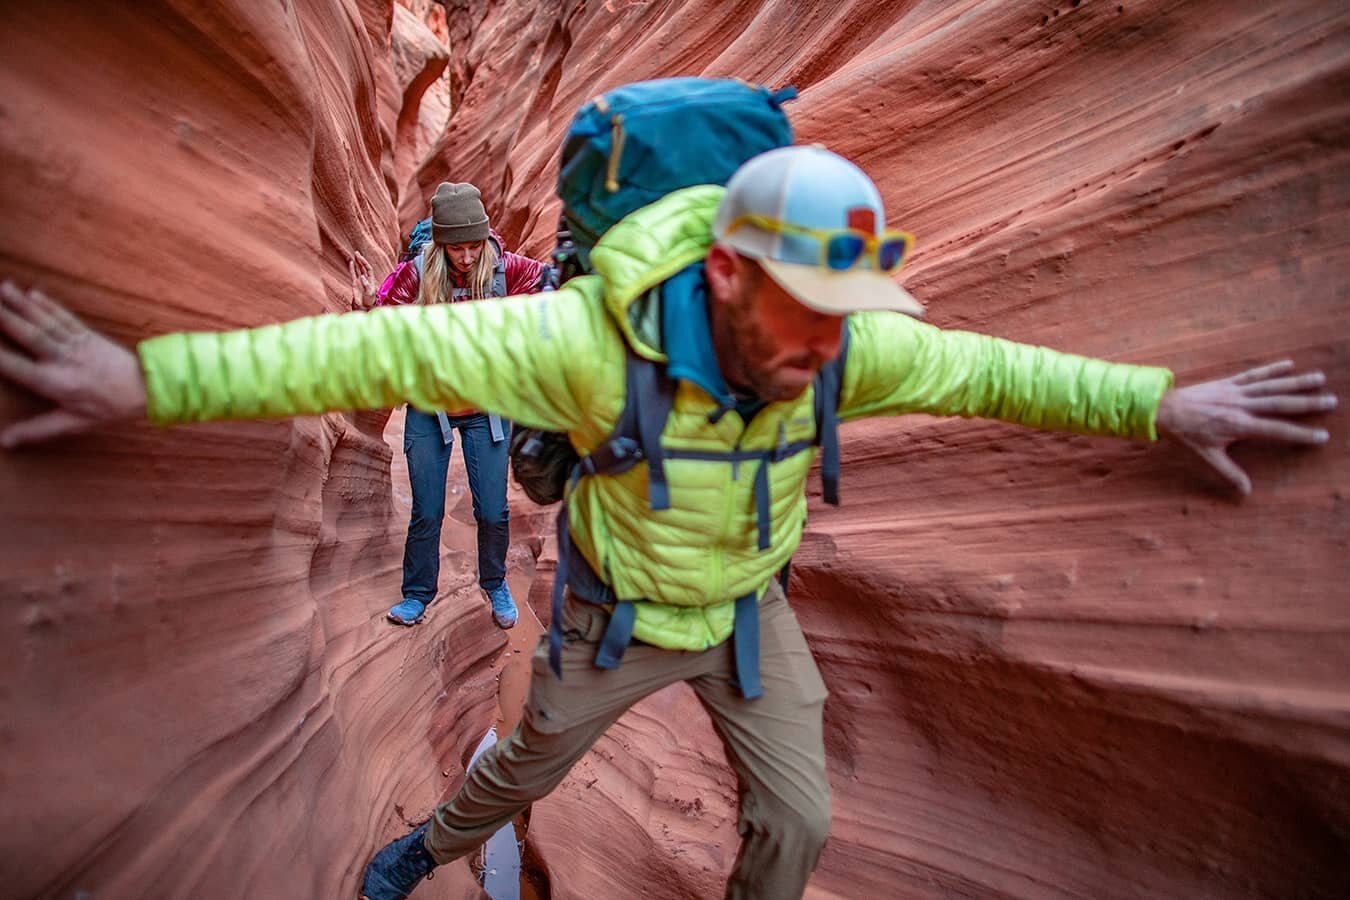 Who else has gone backpacking through a slot canyon? 
Early in the winter @fineartnomad and I went backpacking (her first backpacking trip!) Through canyon country in Utah. It was spectacular. And very very cold!! She handled it like a champ. I think